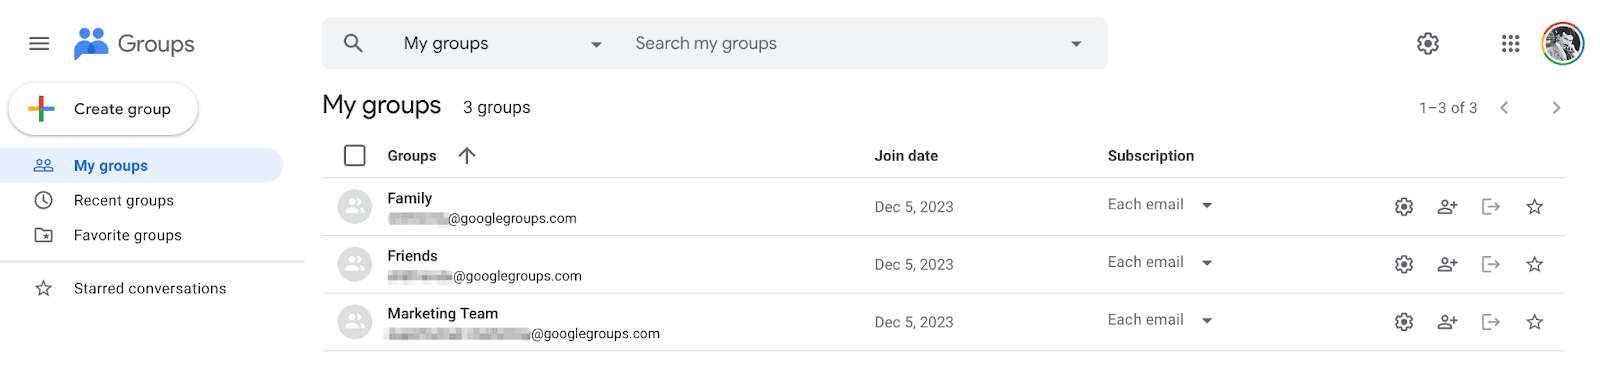 how-to-create-a-group-in-gmail-groups